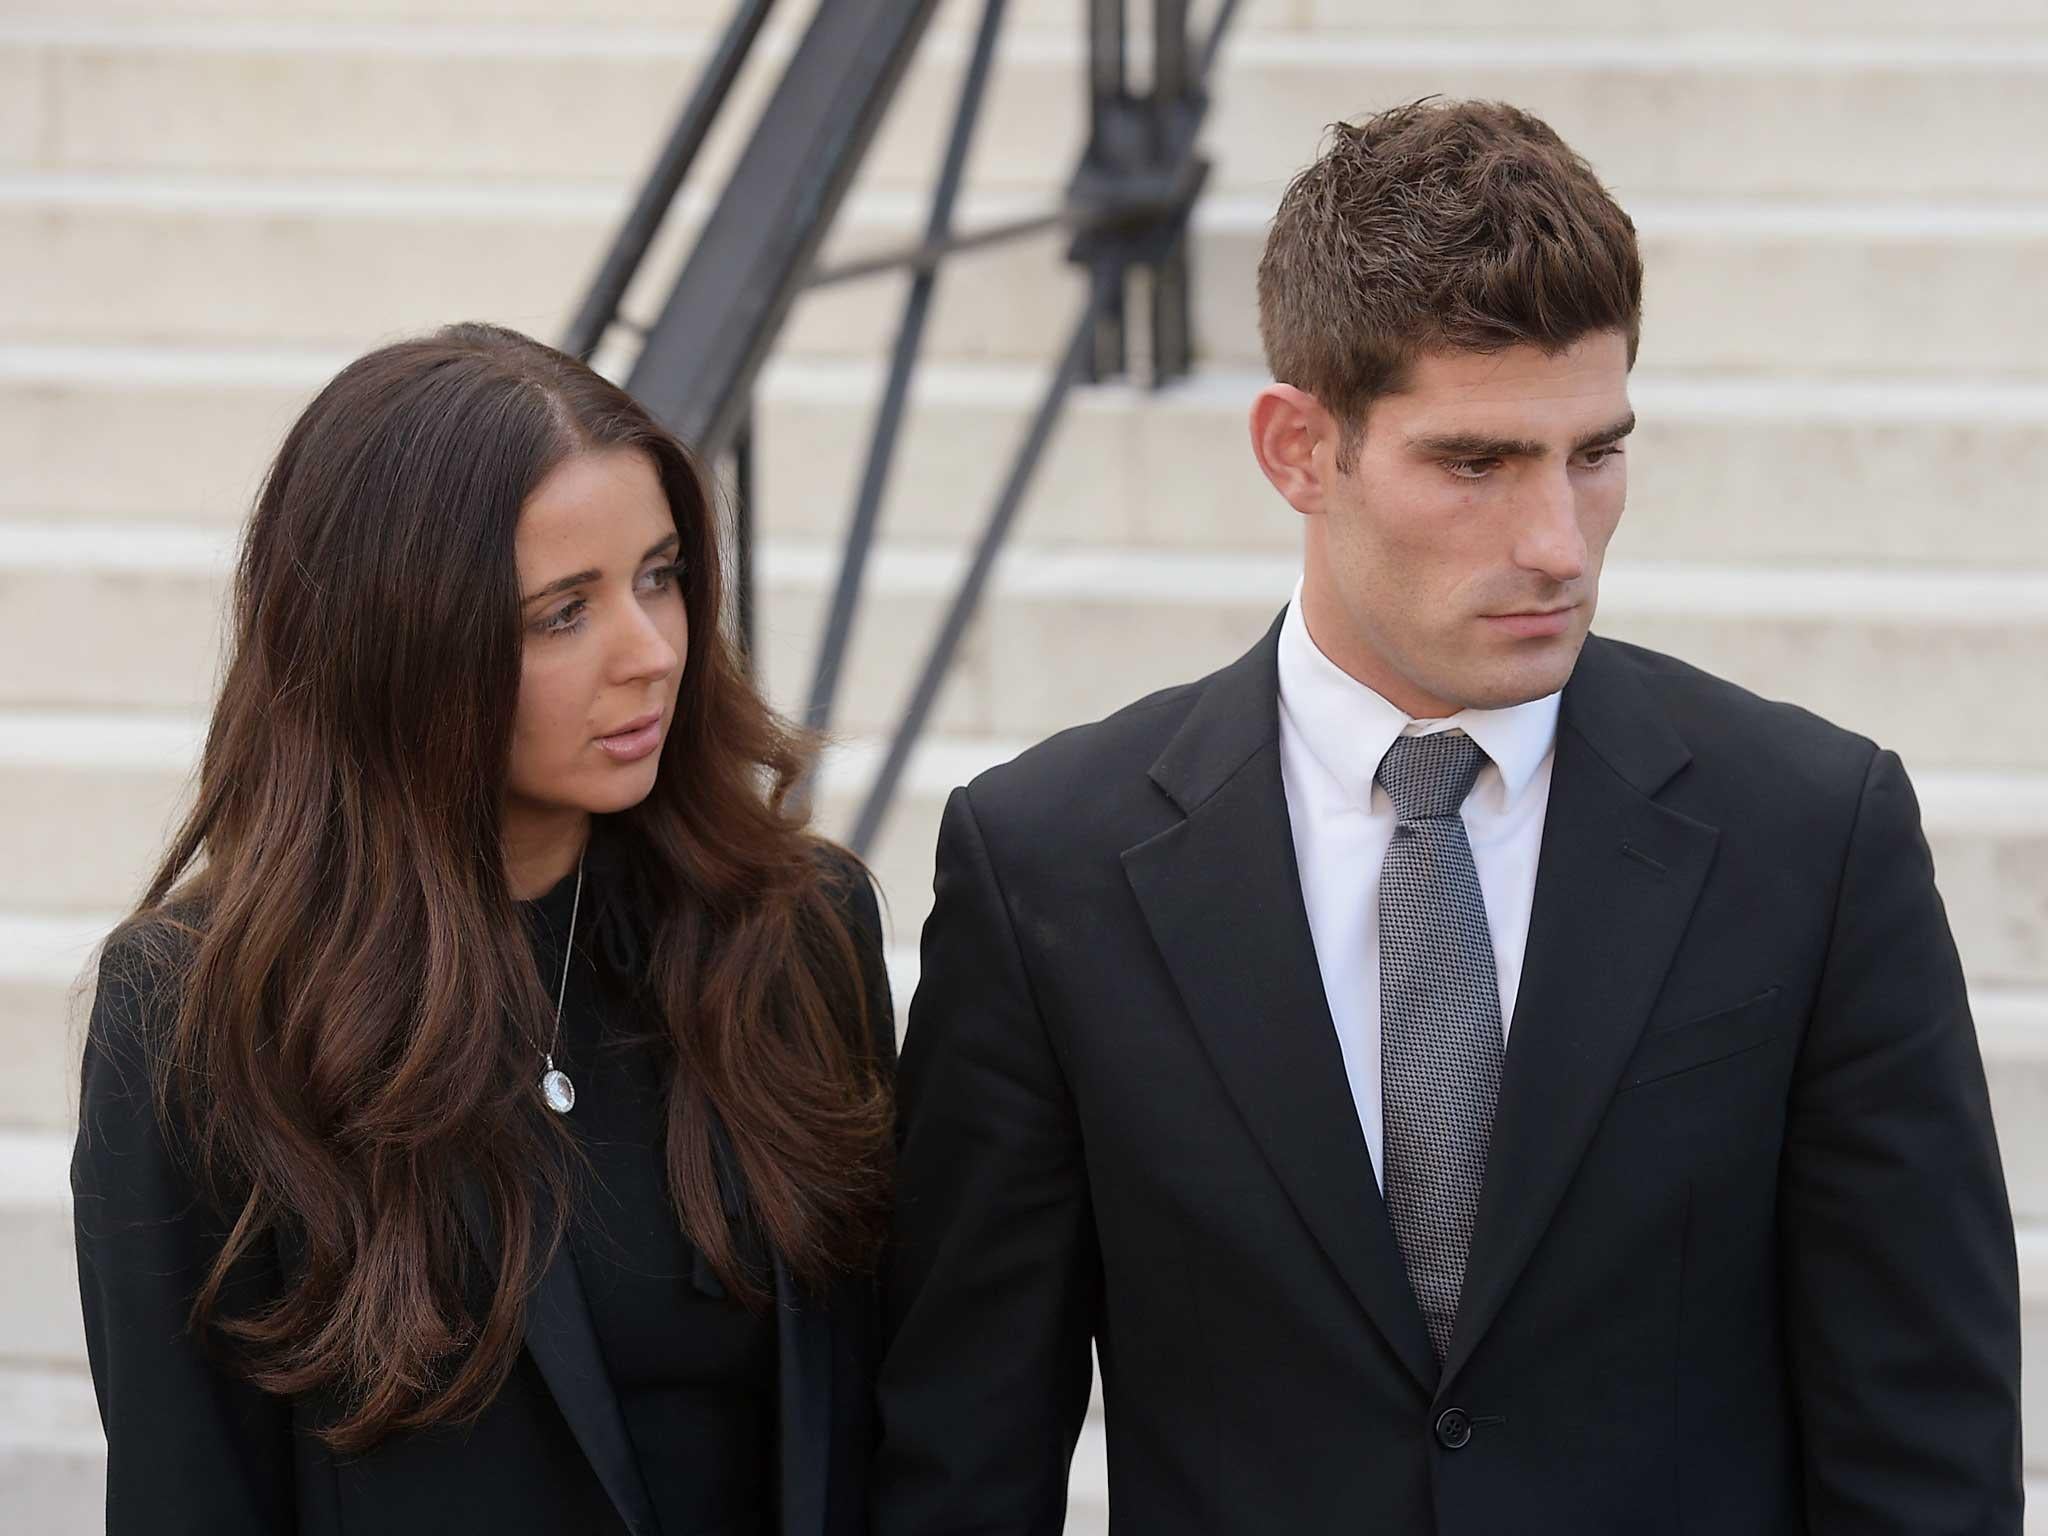 Footballer Ched Evans and partner Natasha Massey outside Cardiff Crown Court, where he has been found not guilty of raping a teenager in a hotel in north Wales following a two week retrial